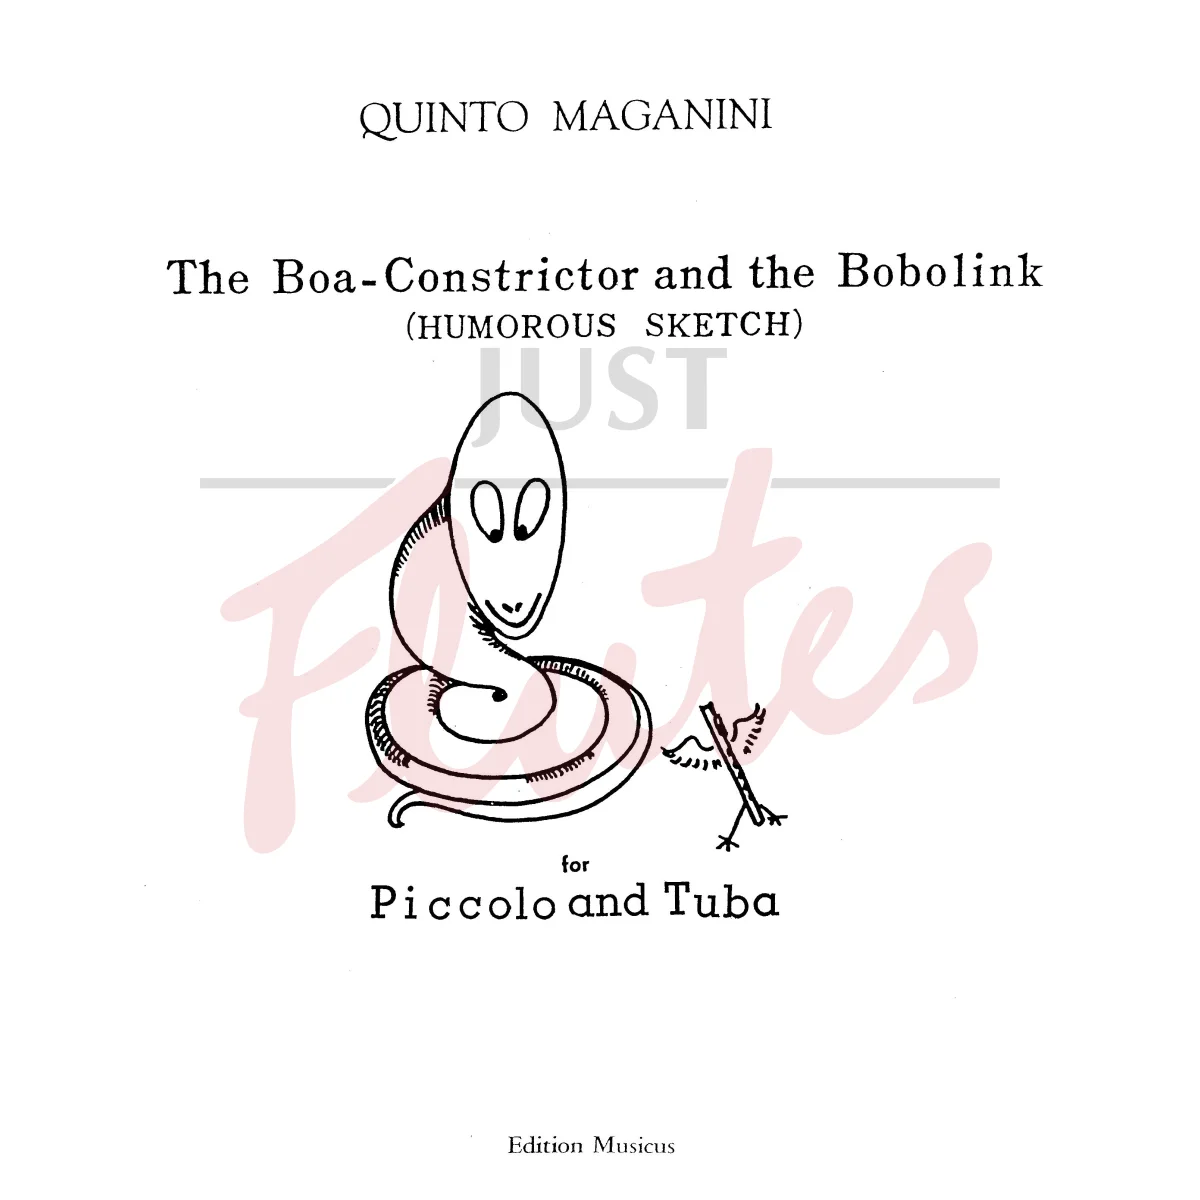 The Boa Constrictor and The Bobolink: Humorous Sketch for Piccolo and Tuba